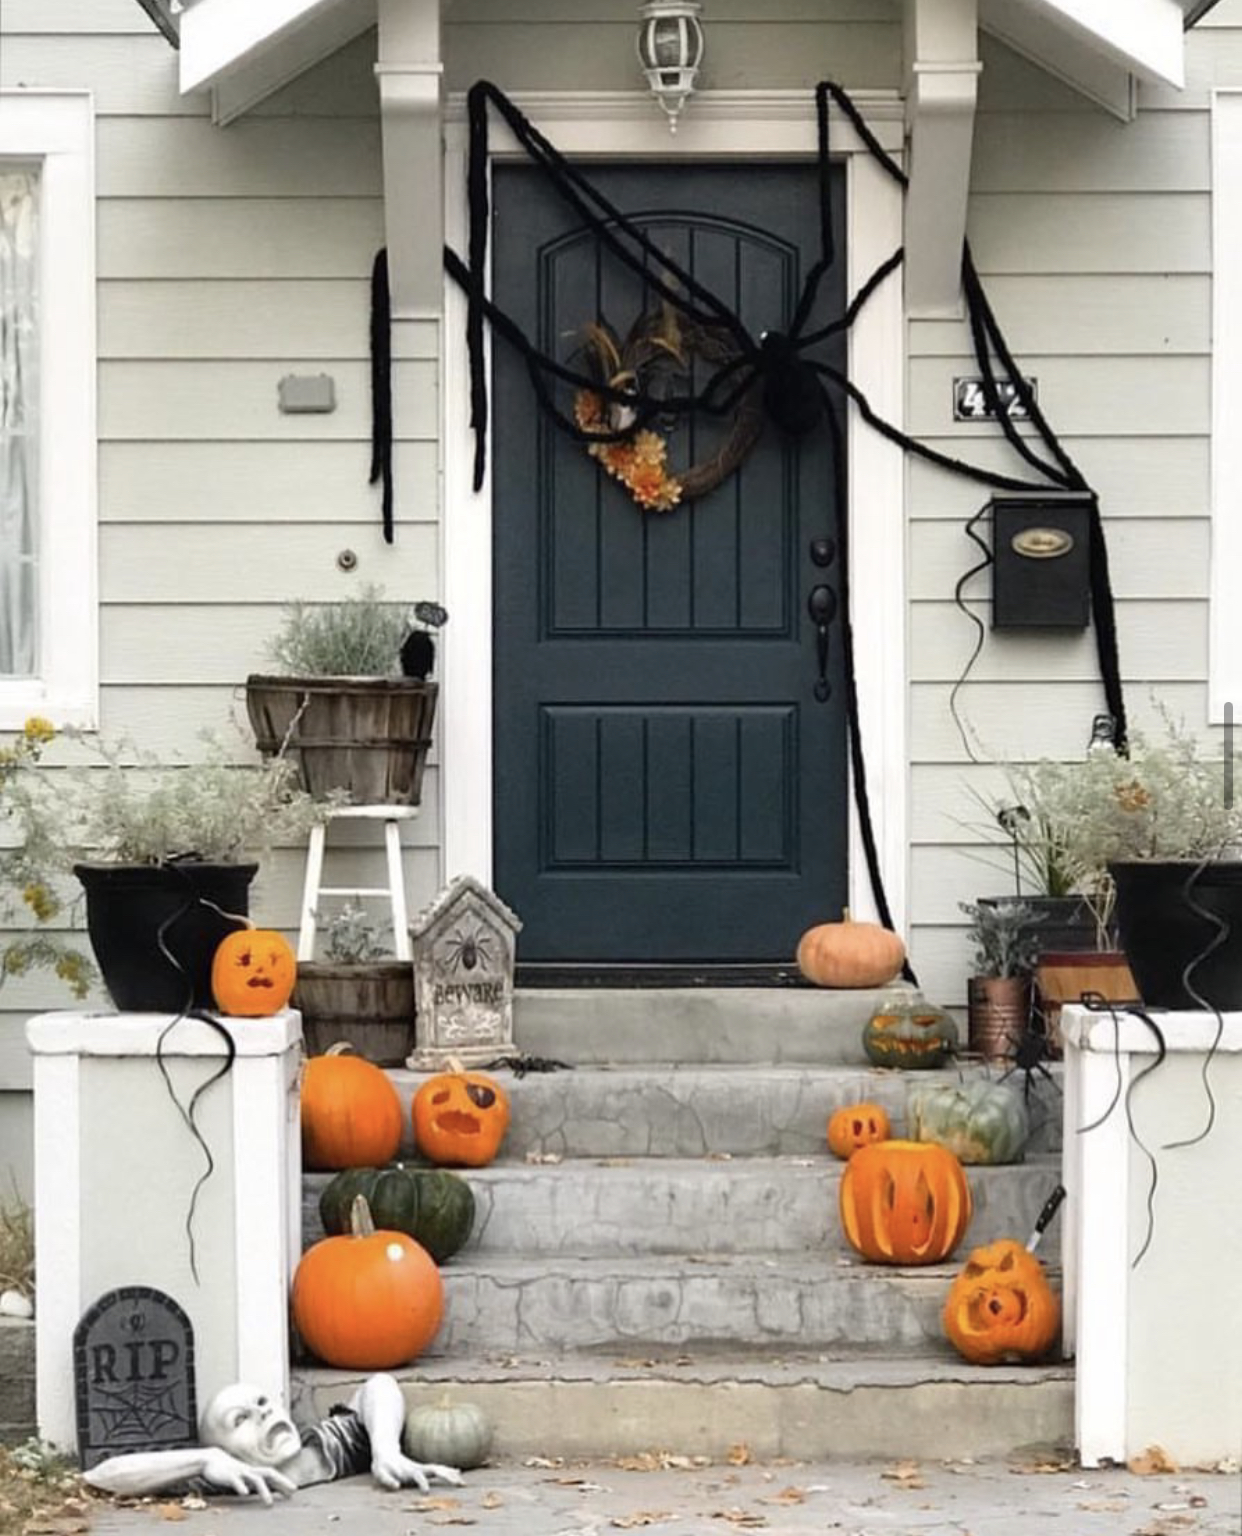 15+ Halloween Decorating Ideas - The Wicker House